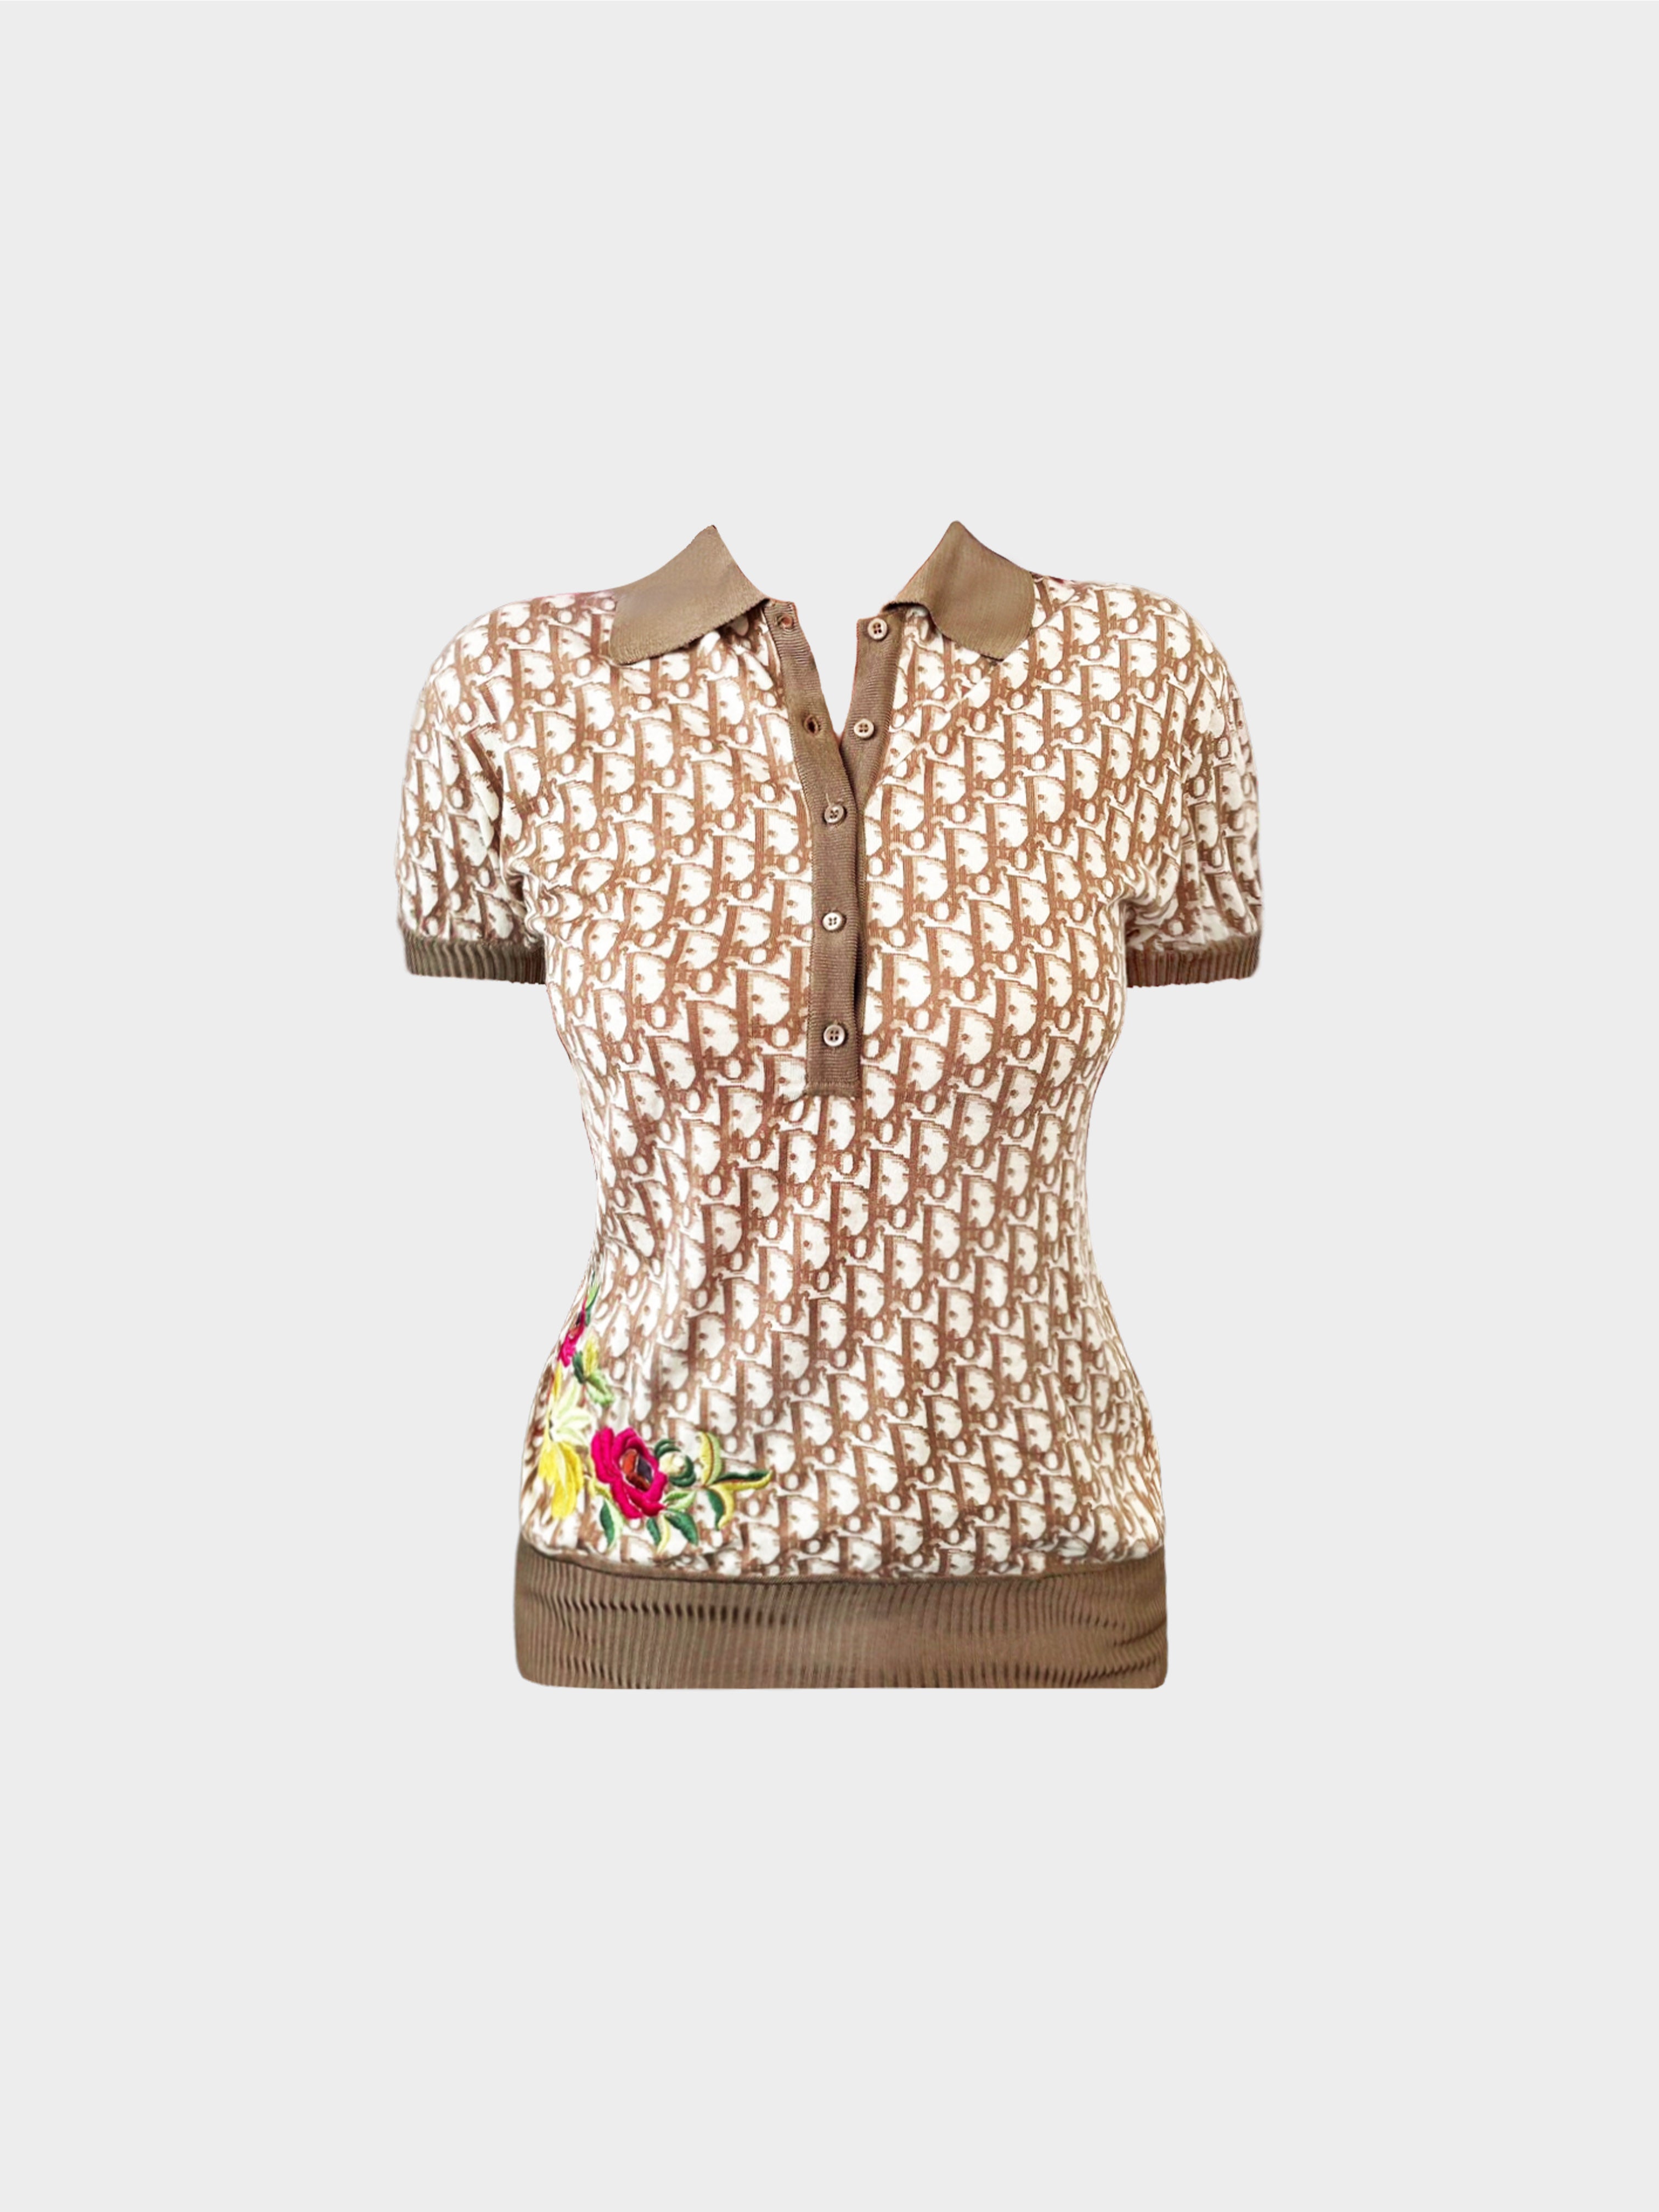 Christian Dior by John Galliano 2005 Floral Embroidered Monogram Shirt